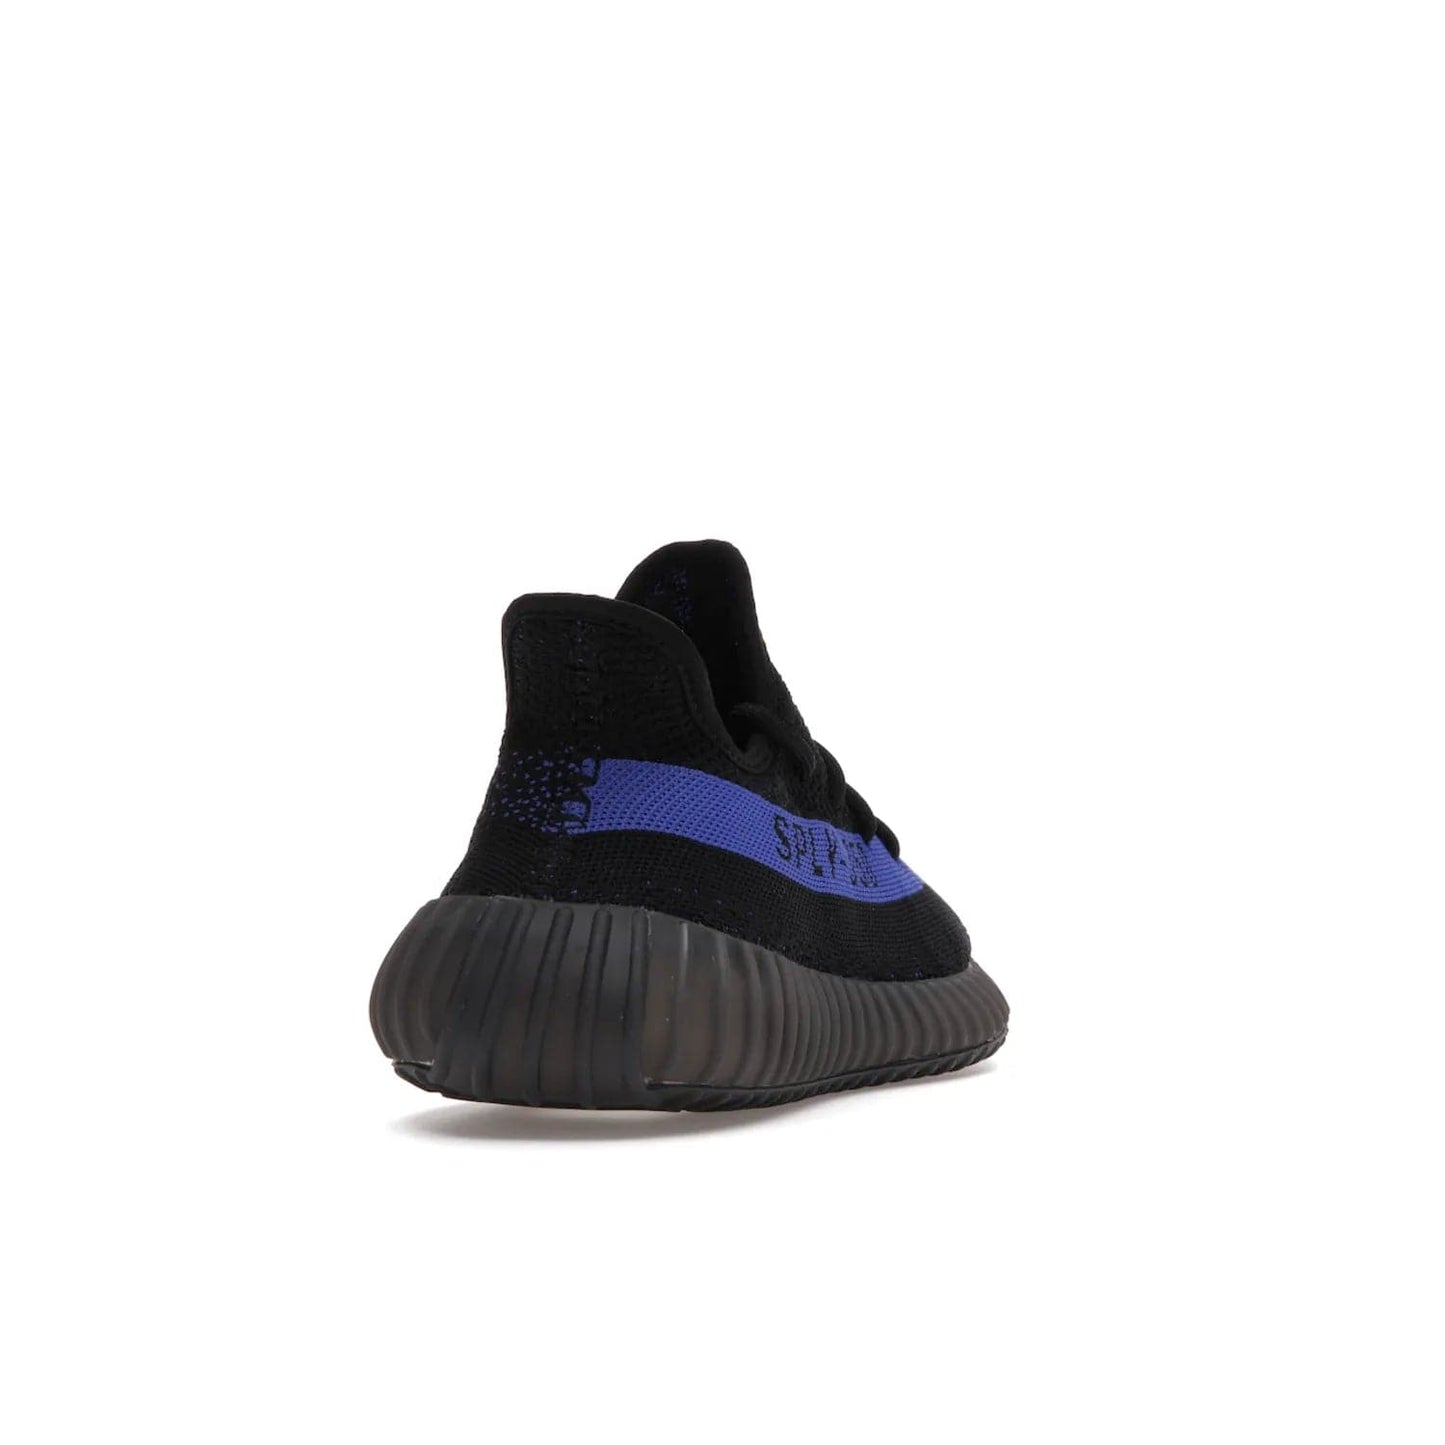 adidas Yeezy Boost 350 V2 Dazzling Blue - Image 30 - Only at www.BallersClubKickz.com - Shop the Adidas Yeezy 350 V2 Dazzling Blue, featuring a solid black Primeknit upper, Dazzling Blue side stripe, “SPLY-350” text, and a muted Boost sole. Releasing Feb 2022, this style is perfect for any shoe fan.